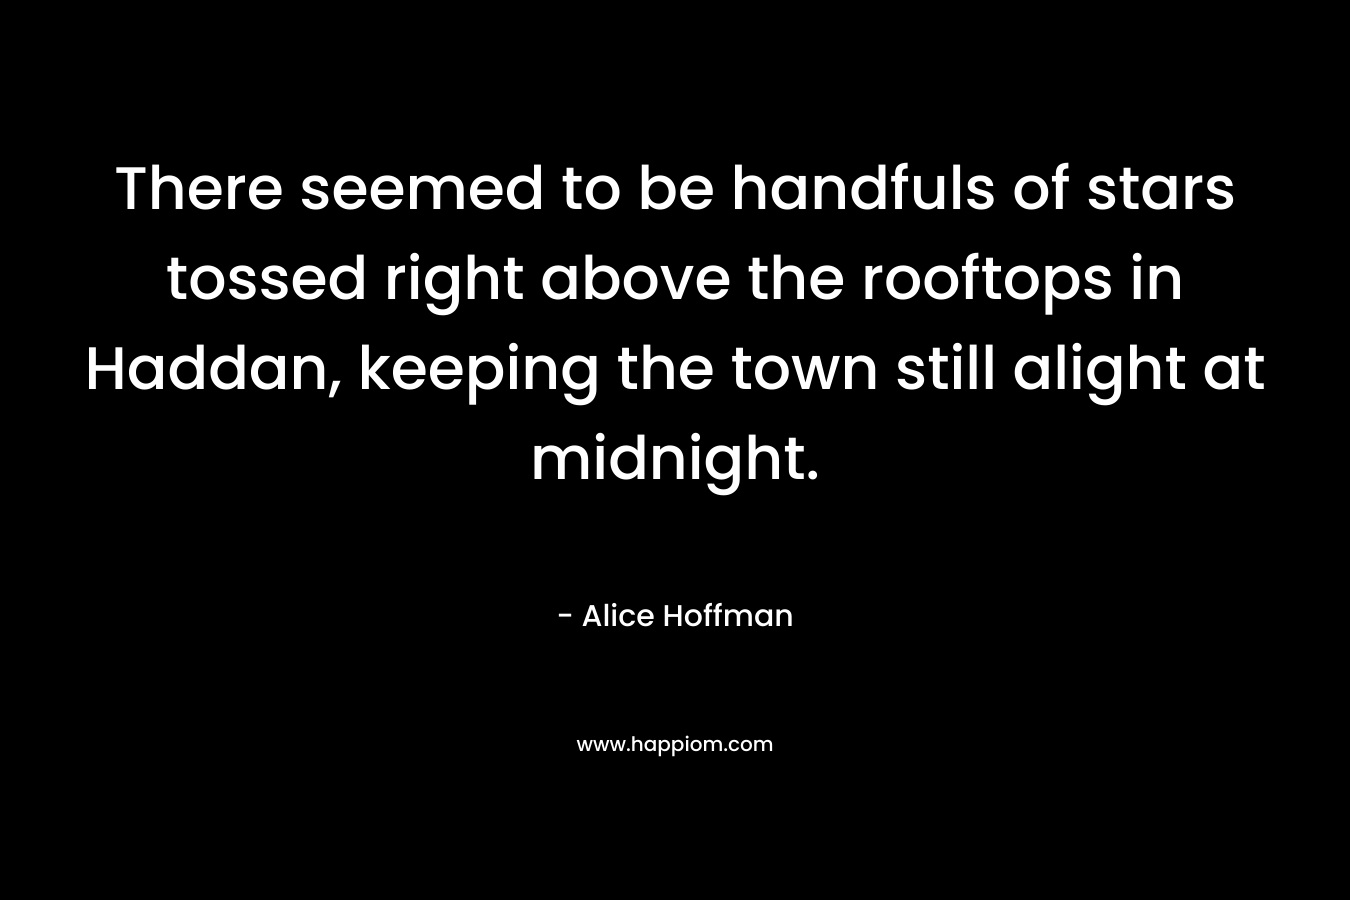 There seemed to be handfuls of stars tossed right above the rooftops in Haddan, keeping the town still alight at midnight. – Alice Hoffman